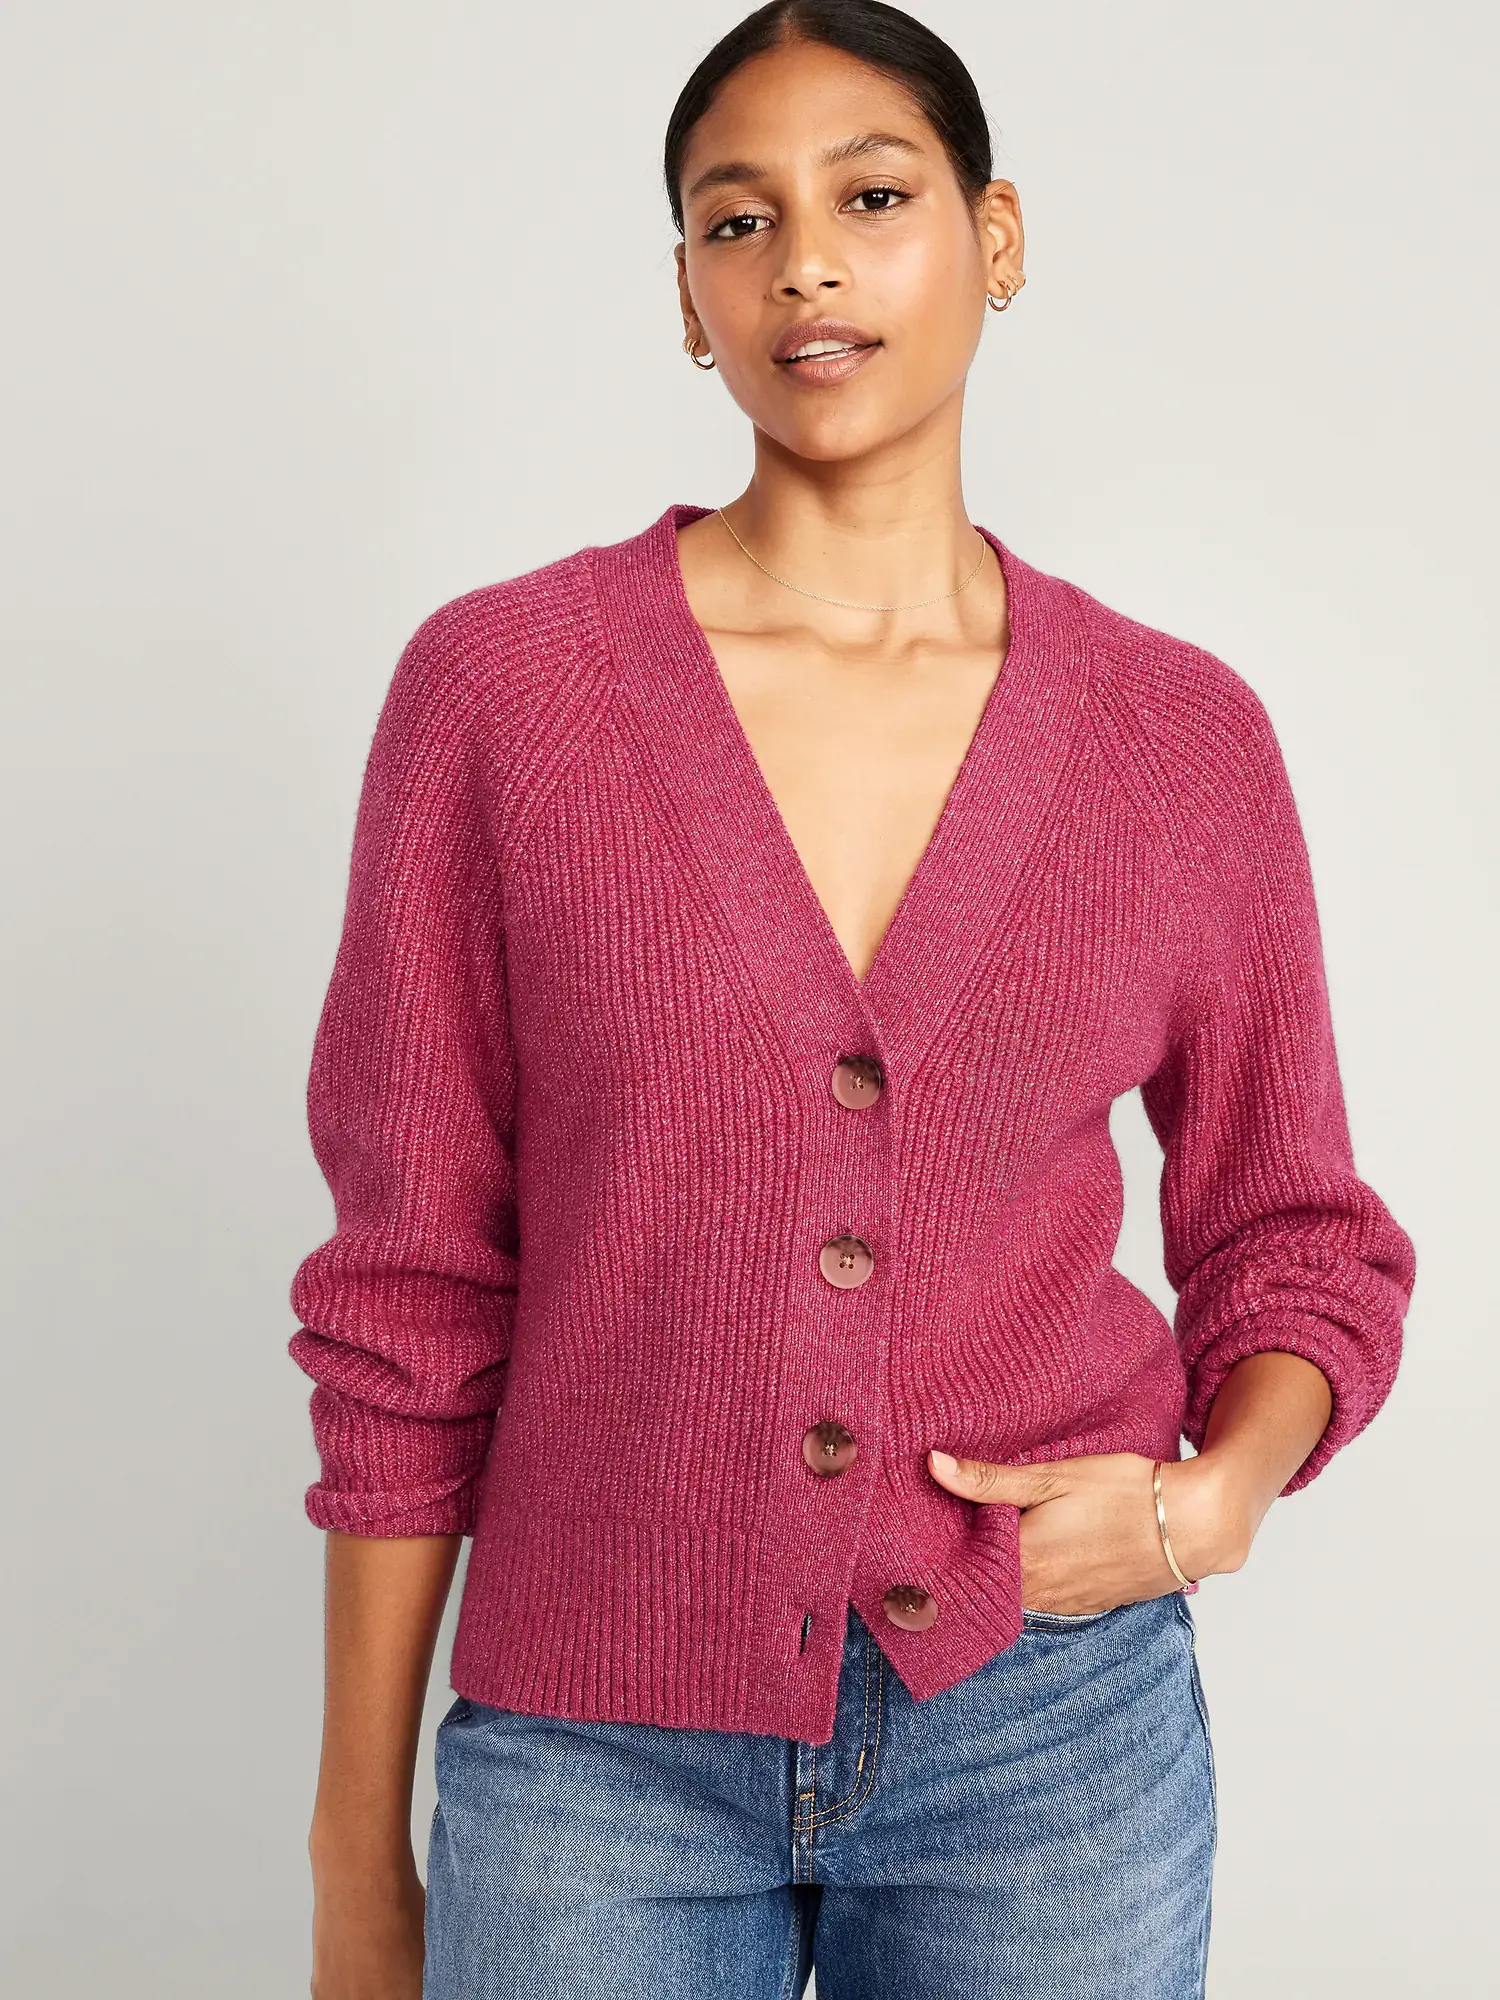 Old Navy Shaker-Stitch Cardigan Sweater for Women pink. 1